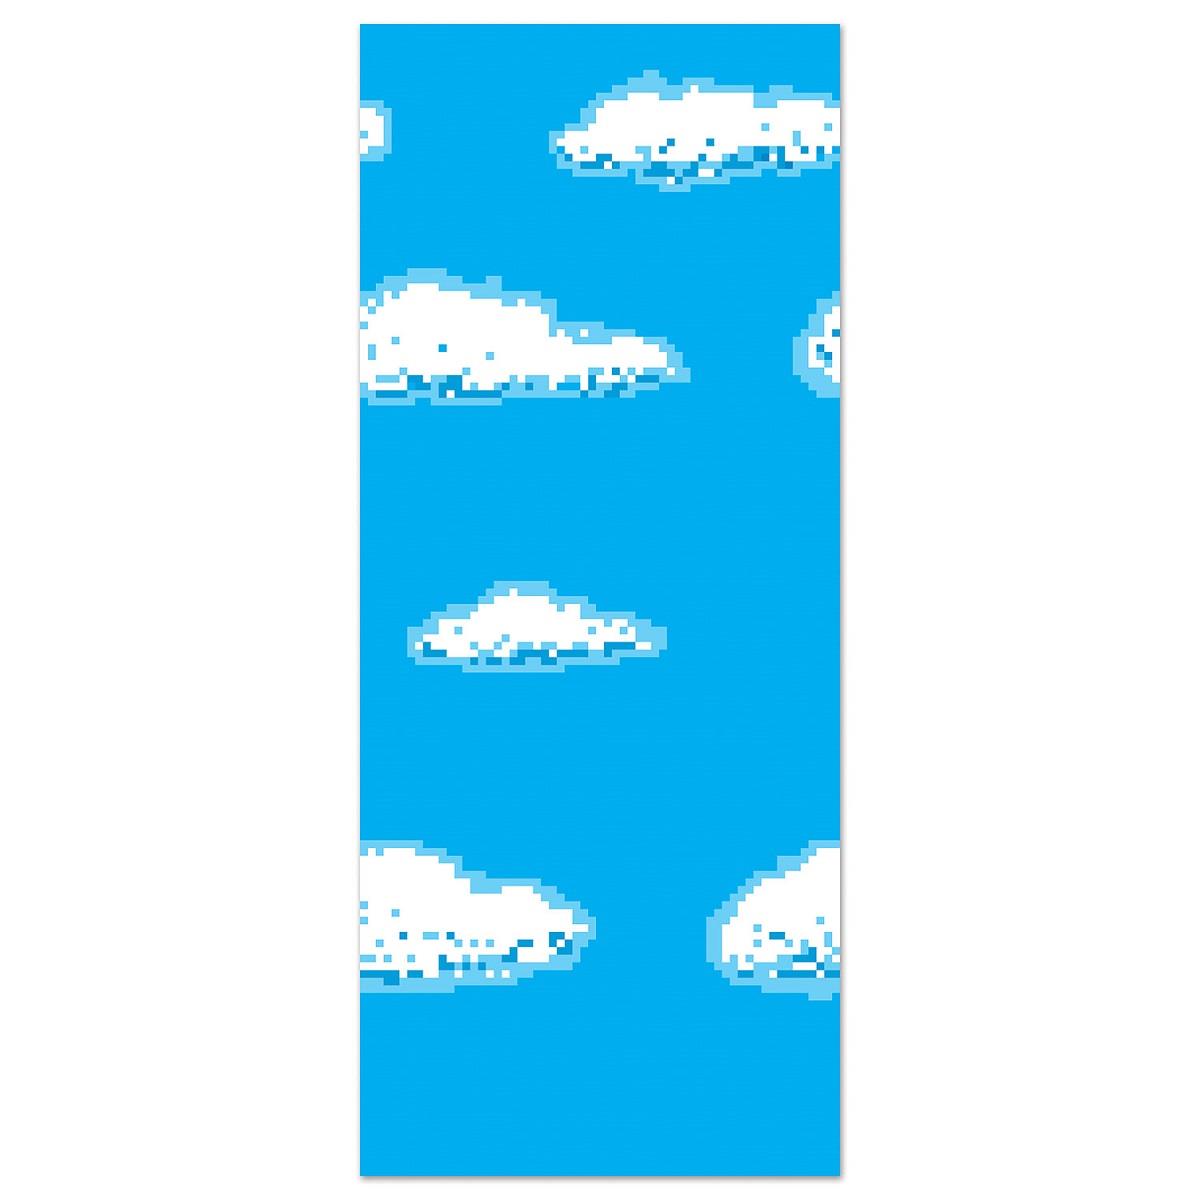 Pack of 6 Gamers 8 Bit Sky and Clouds Photo Backdrop Wall Decorations 4' x 30'